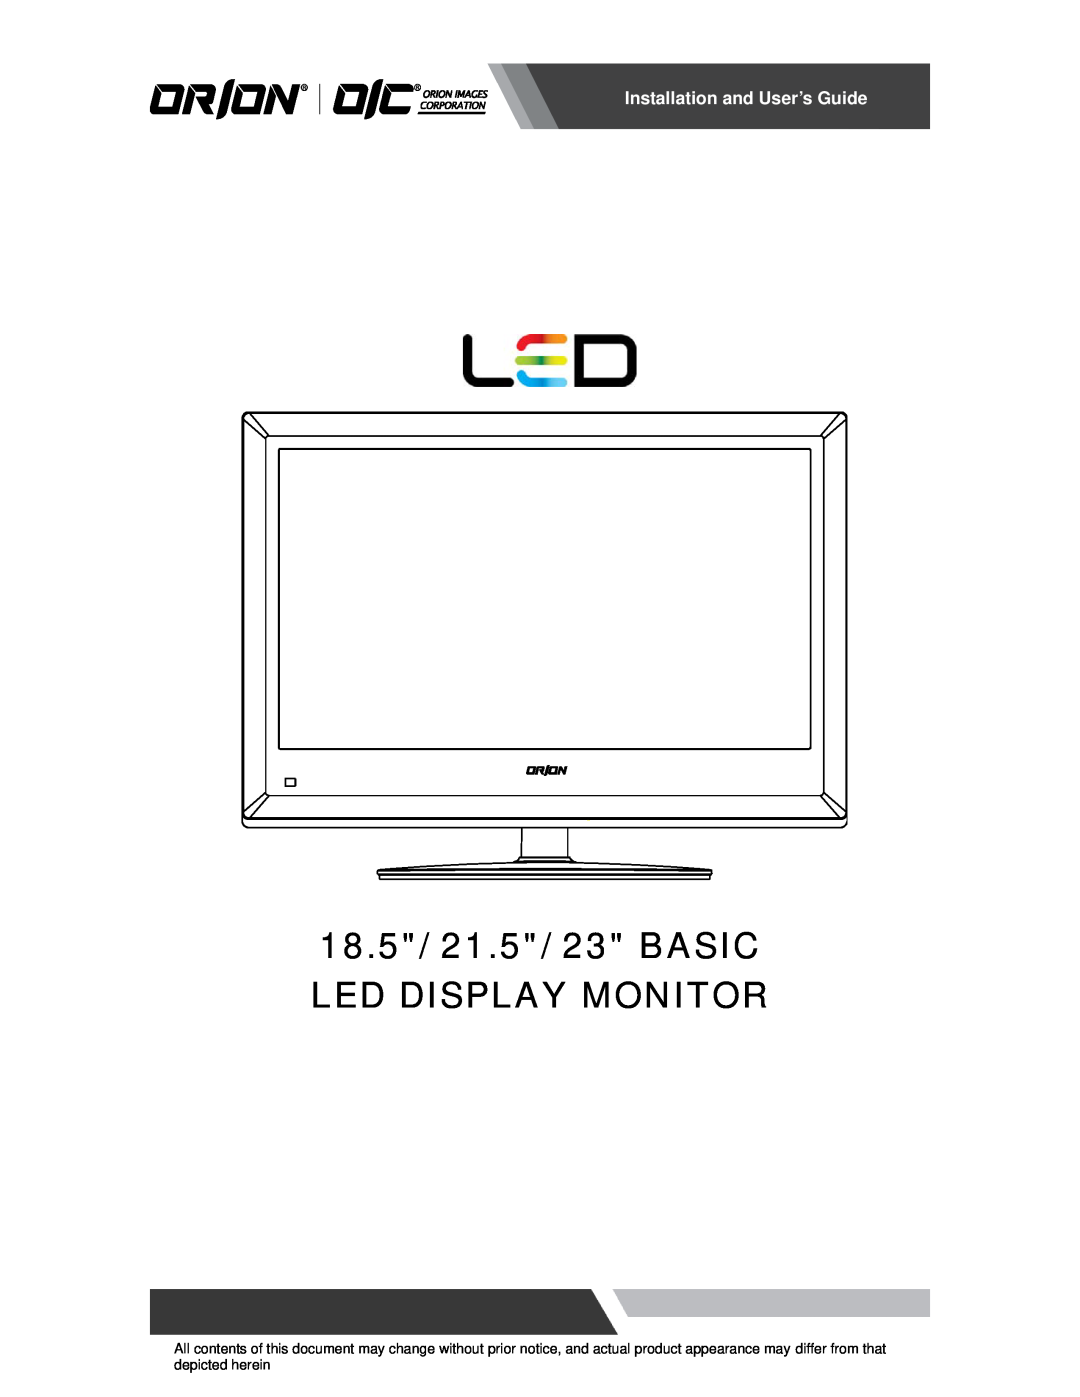 Orion 23REDB manual Installation and User’s Guide, 18.5/ 21.5/ 23 BASIC LED DISPLAY MONITOR 